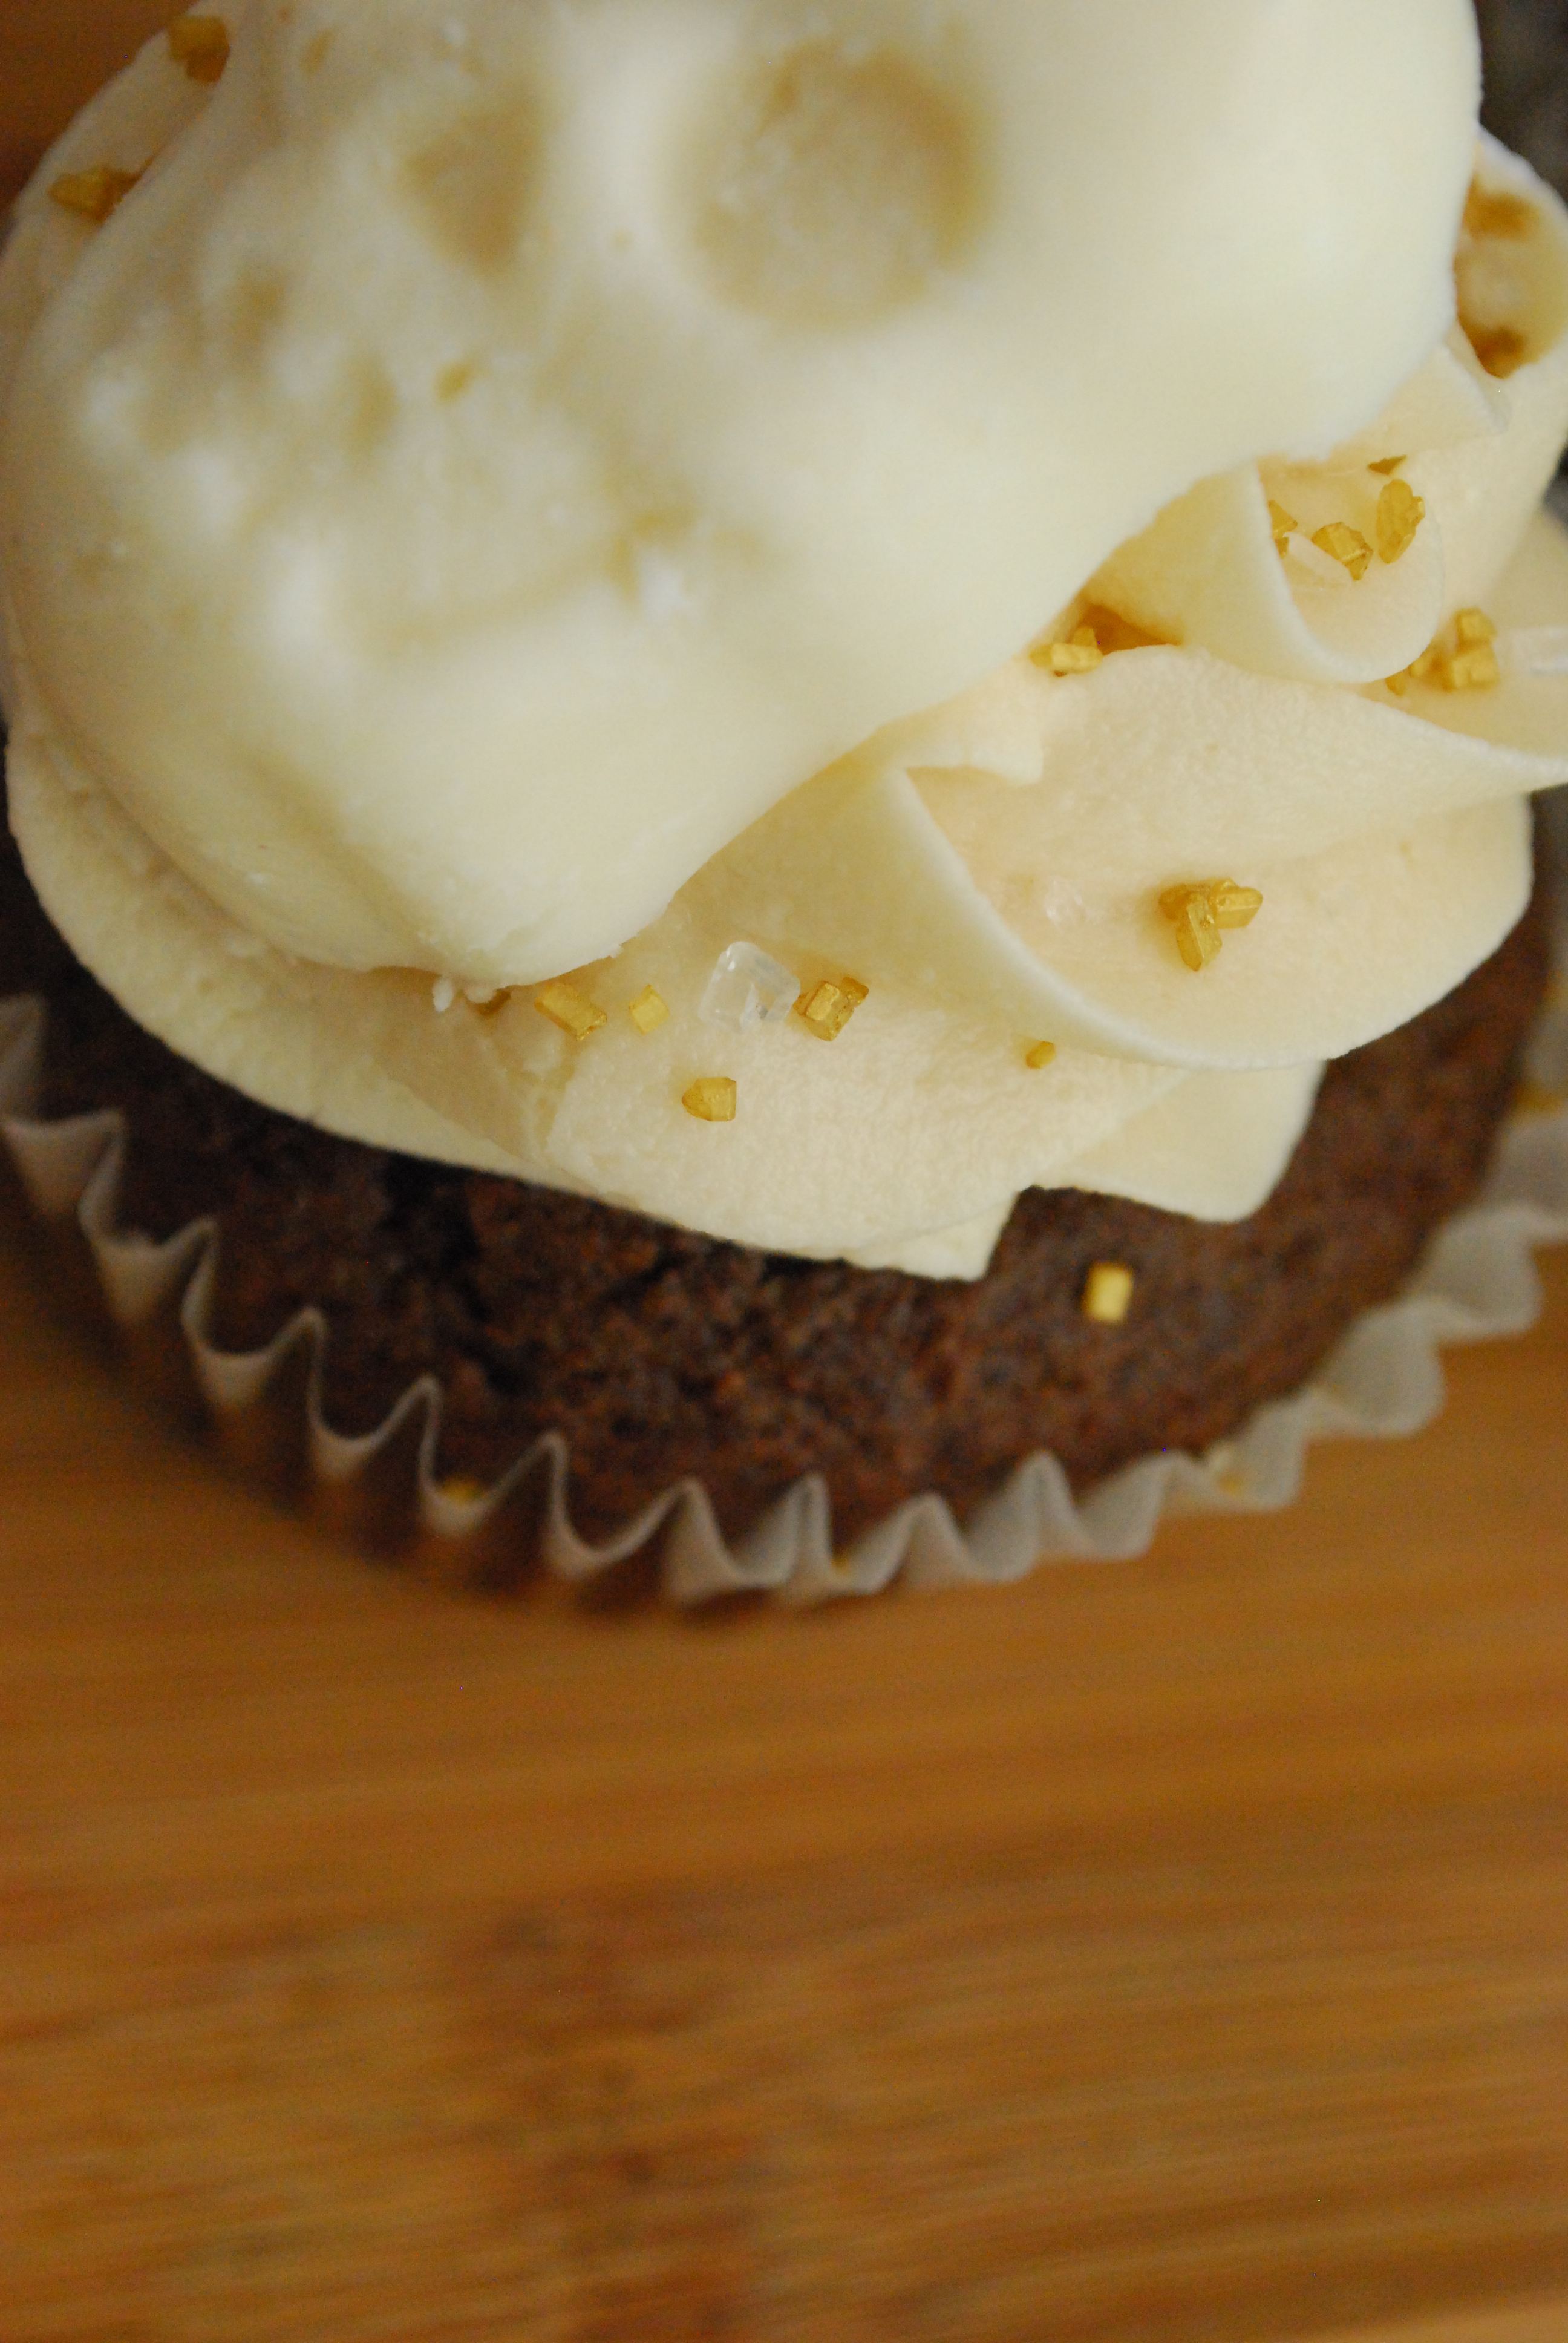 Kahlua Cupcakes with Mocha Frosting